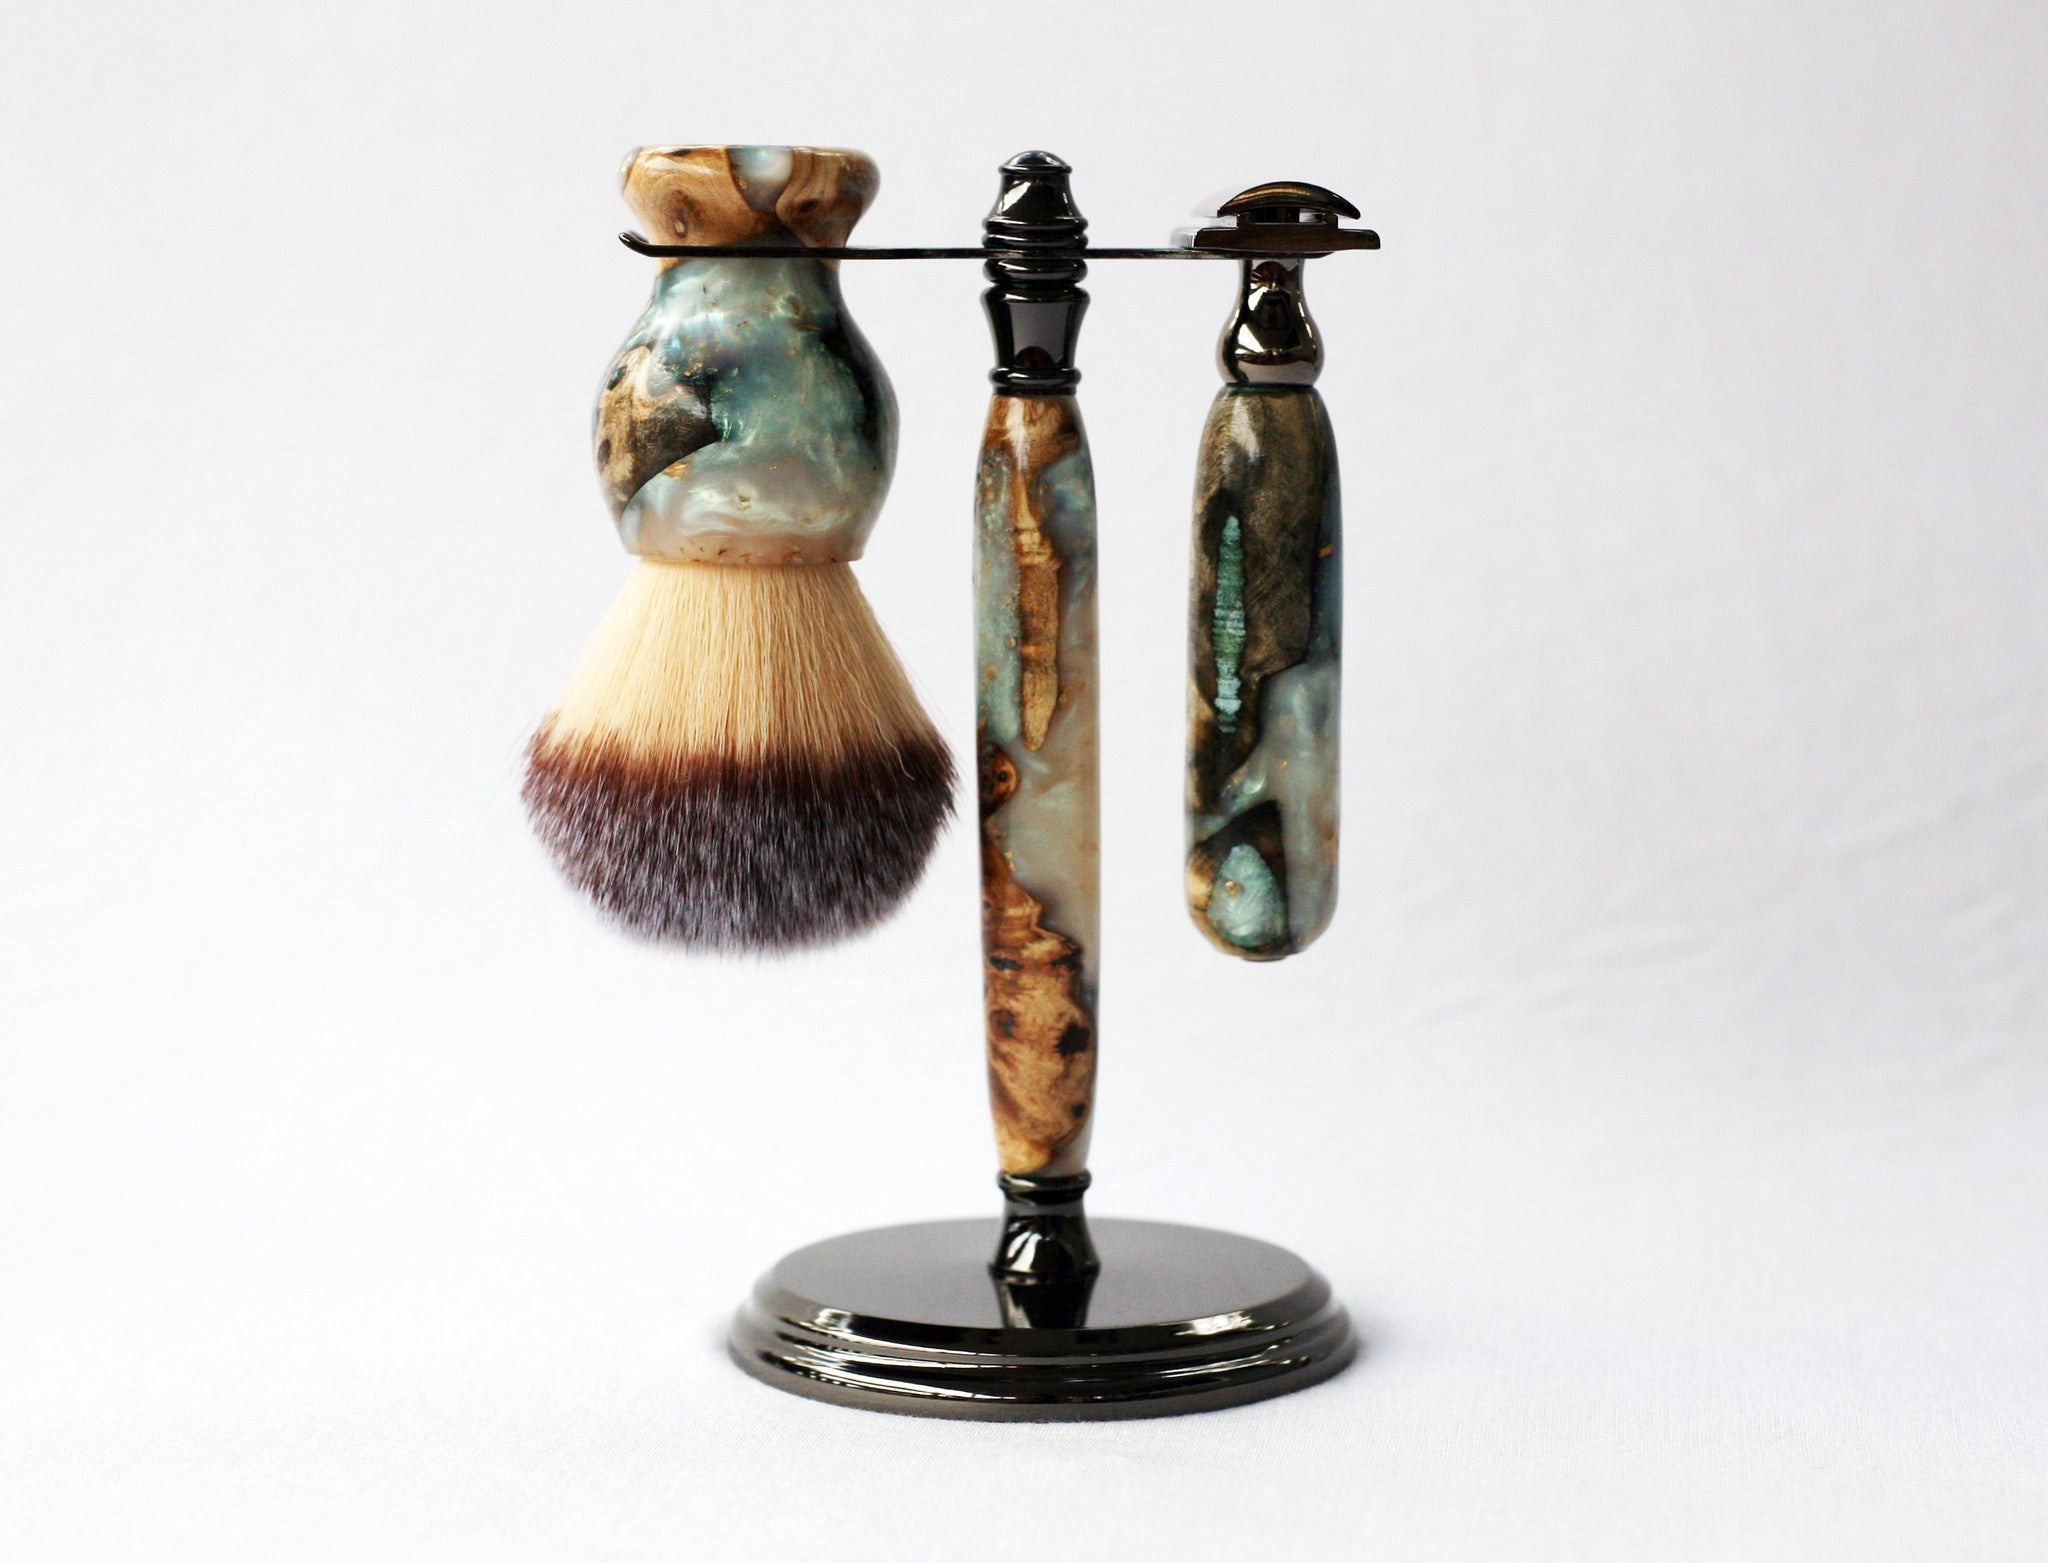 Buckeye Burl Shave Set with 'Travel to Jupiter'( pearl)Resin safety razor, 26mm lather brush and a matching shave stand. - CreationsByWill